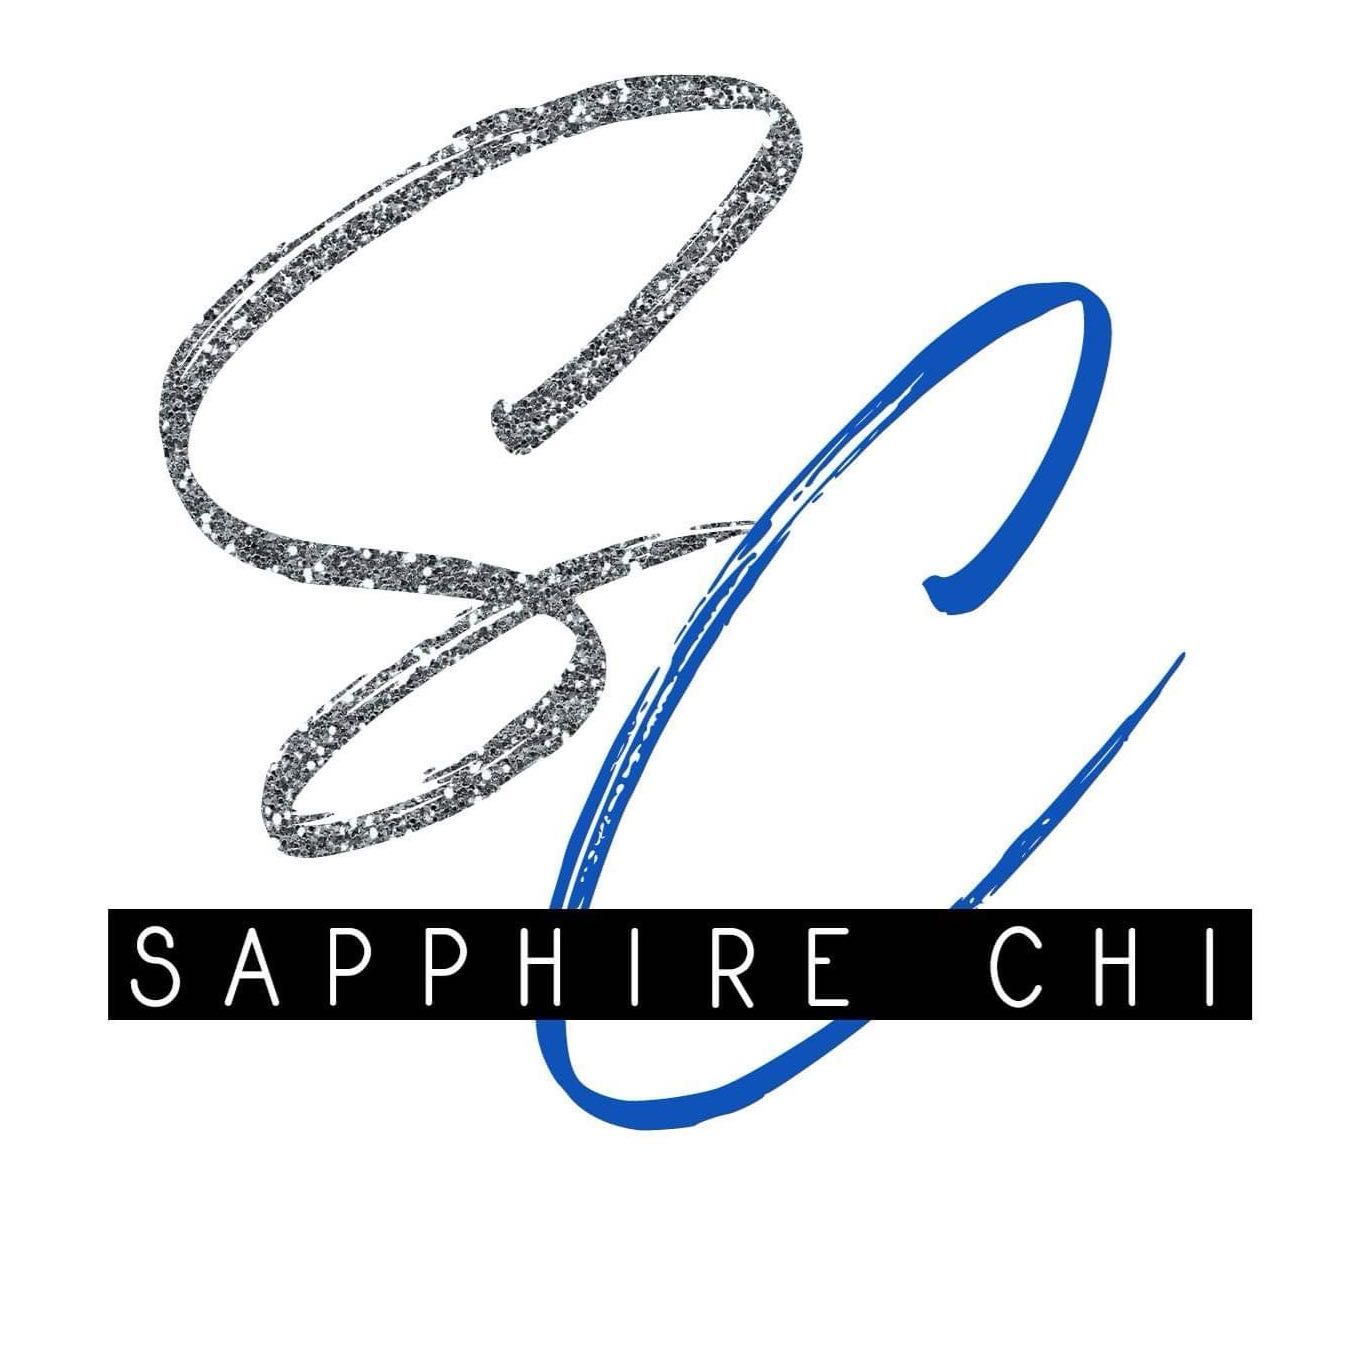 Sapphire Nail & Foot Spa, 304 W 119th St, Suite 2, Chicago, 60628